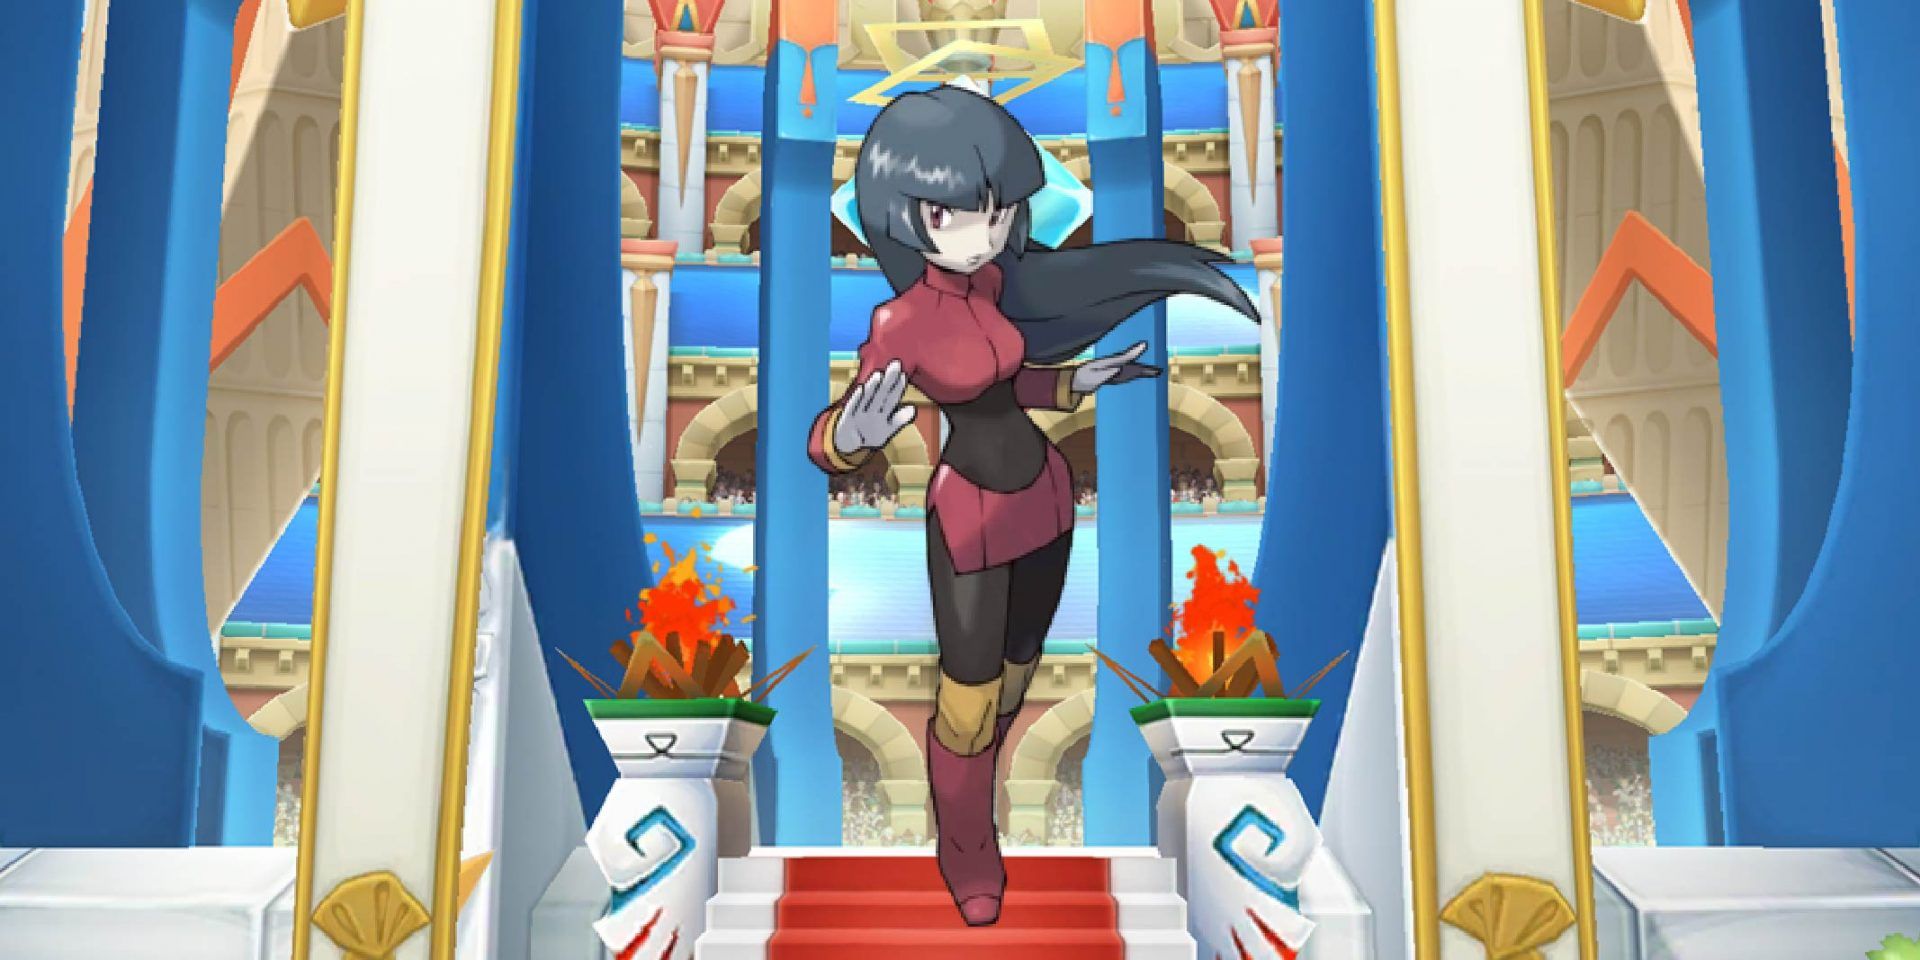 Sabrina from Pokémon standing against an arena backdrop.